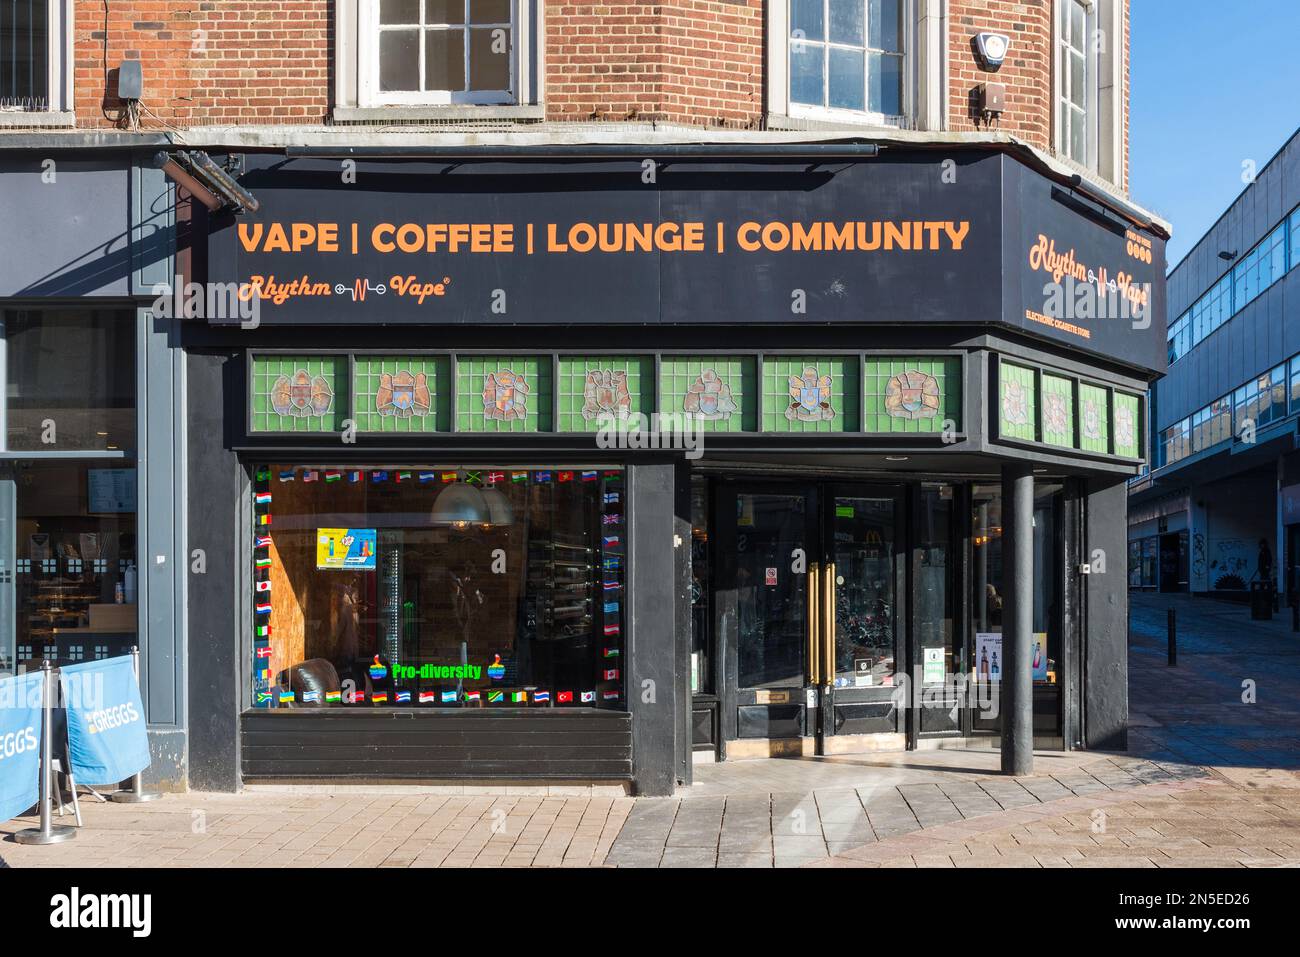 Rhythm and Vape coffee and vape shop in Dudley Street, the main shopping hit street in Wolverhampton Stock Photo